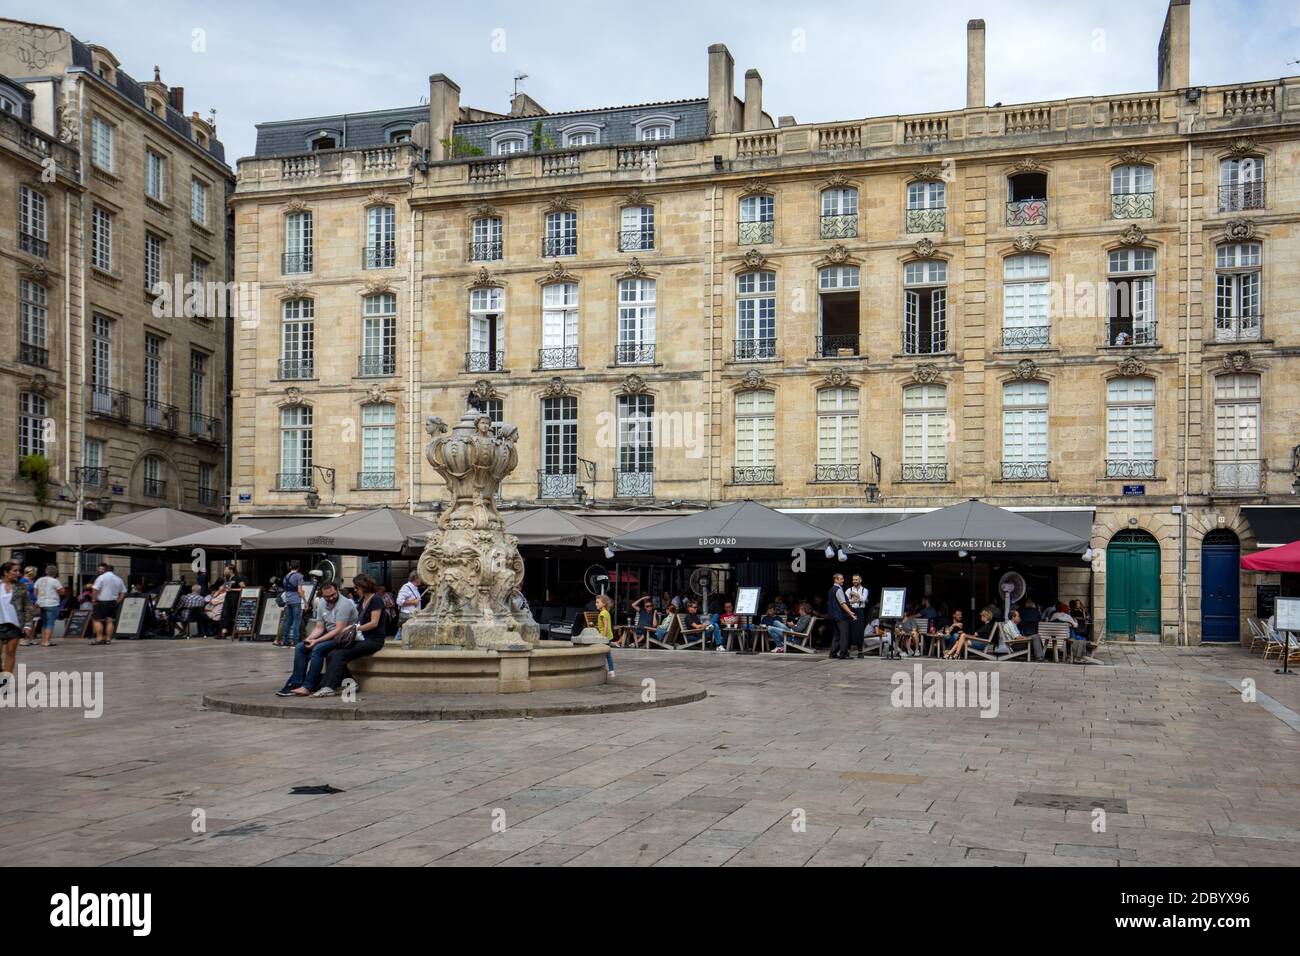 Bordeaux, France - September 9, 2018: Parliament Square or Place du Parlement . Historic square featuring an ornate fountain, cafes and restaurants in Stock Photo